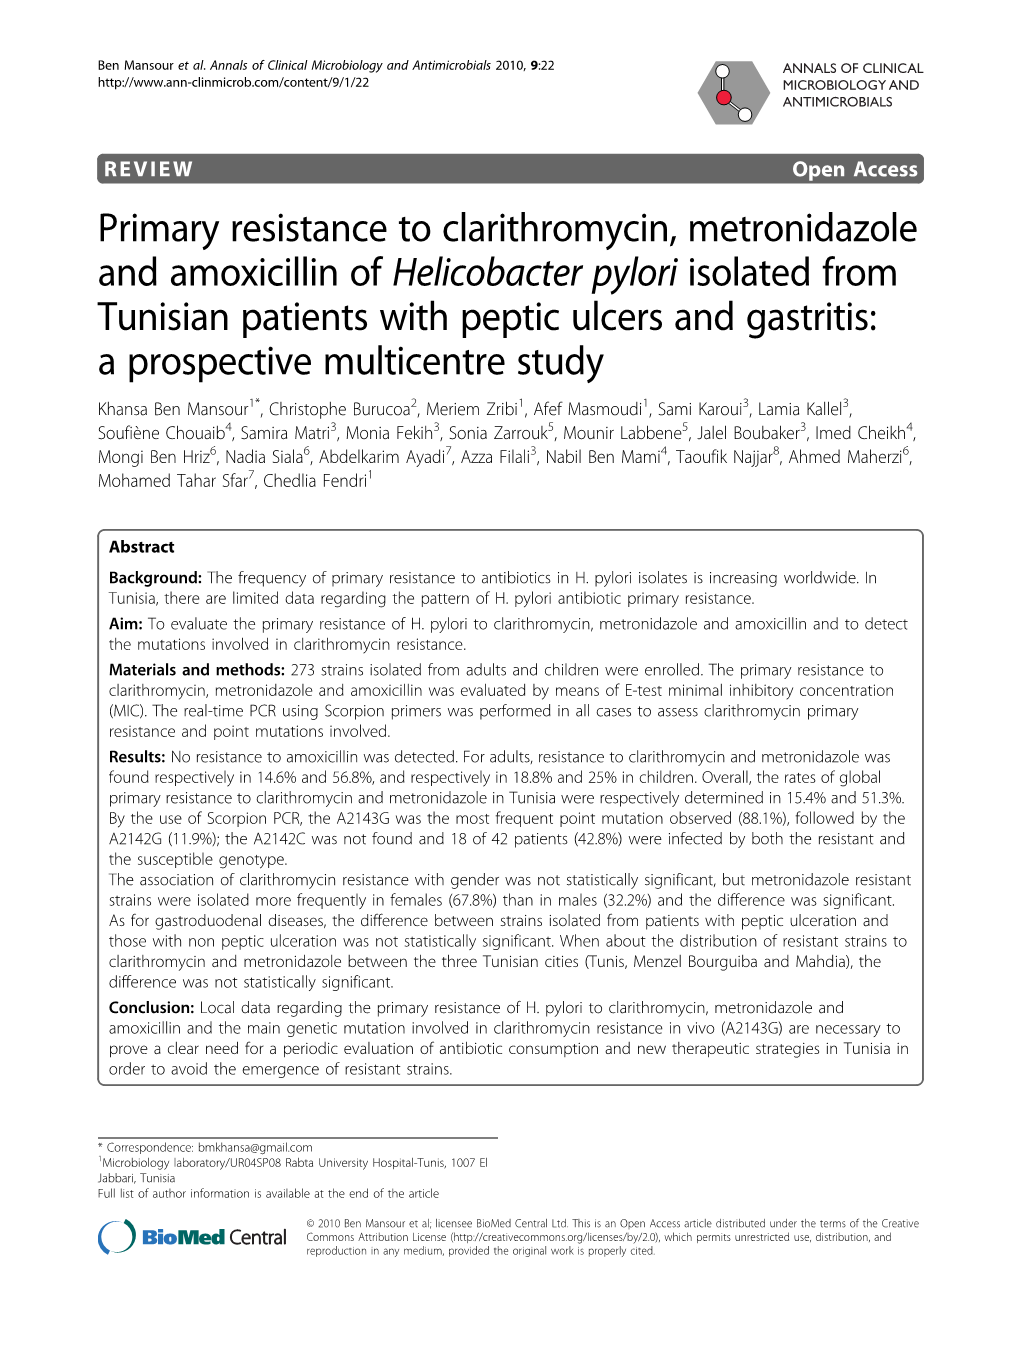 Primary Resistance to Clarithromycin, Metronidazole and Amoxicillin Of